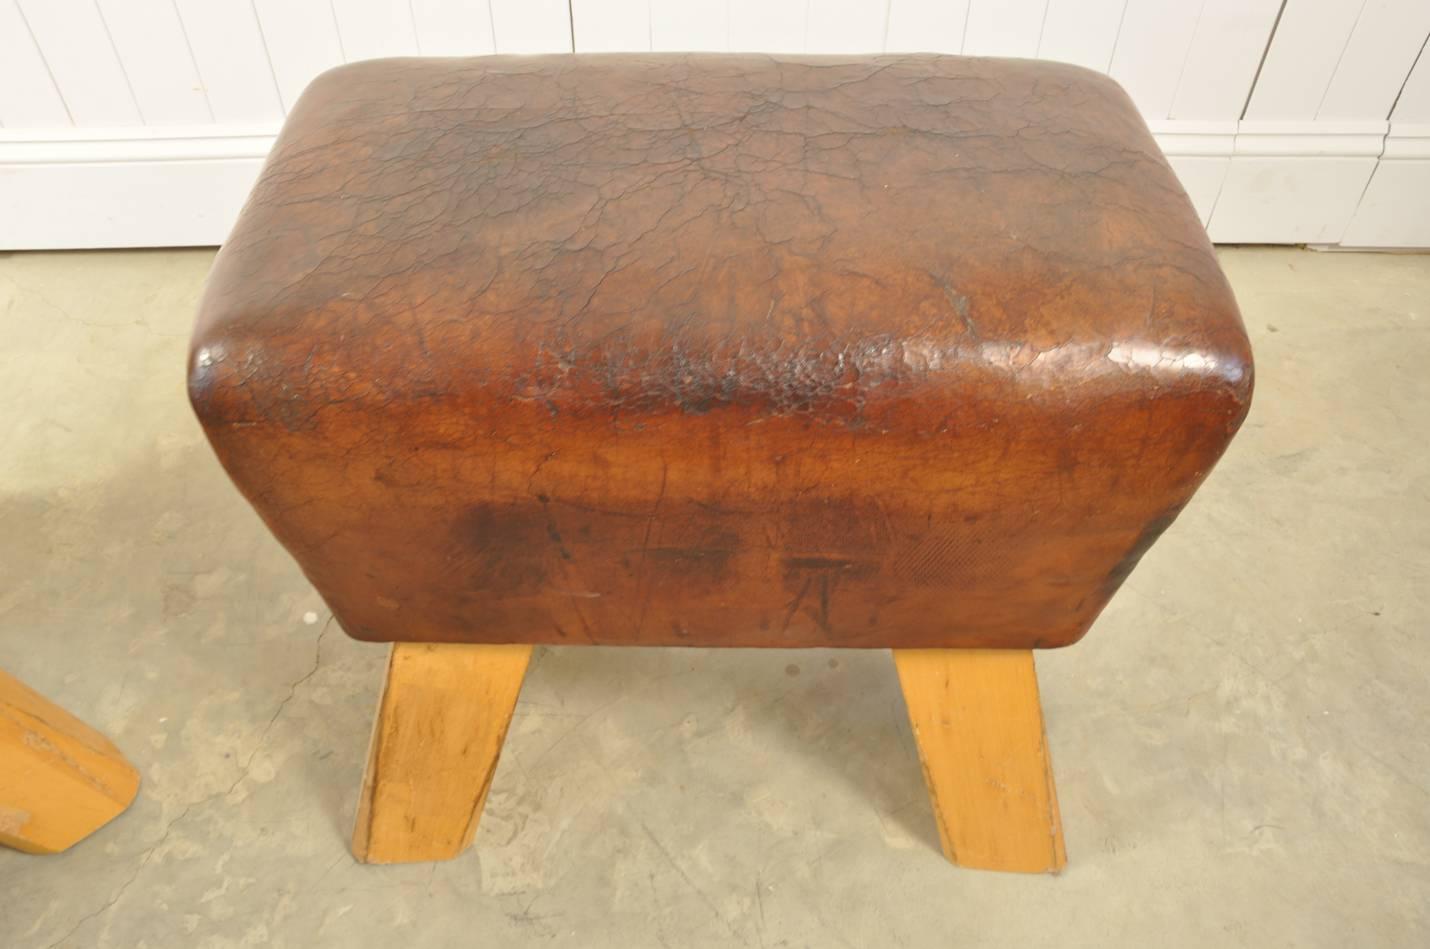 Small Vintage Reclaimed Leather Pommel Horse Bench In Distressed Condition In Cirencester, Gloucestershire